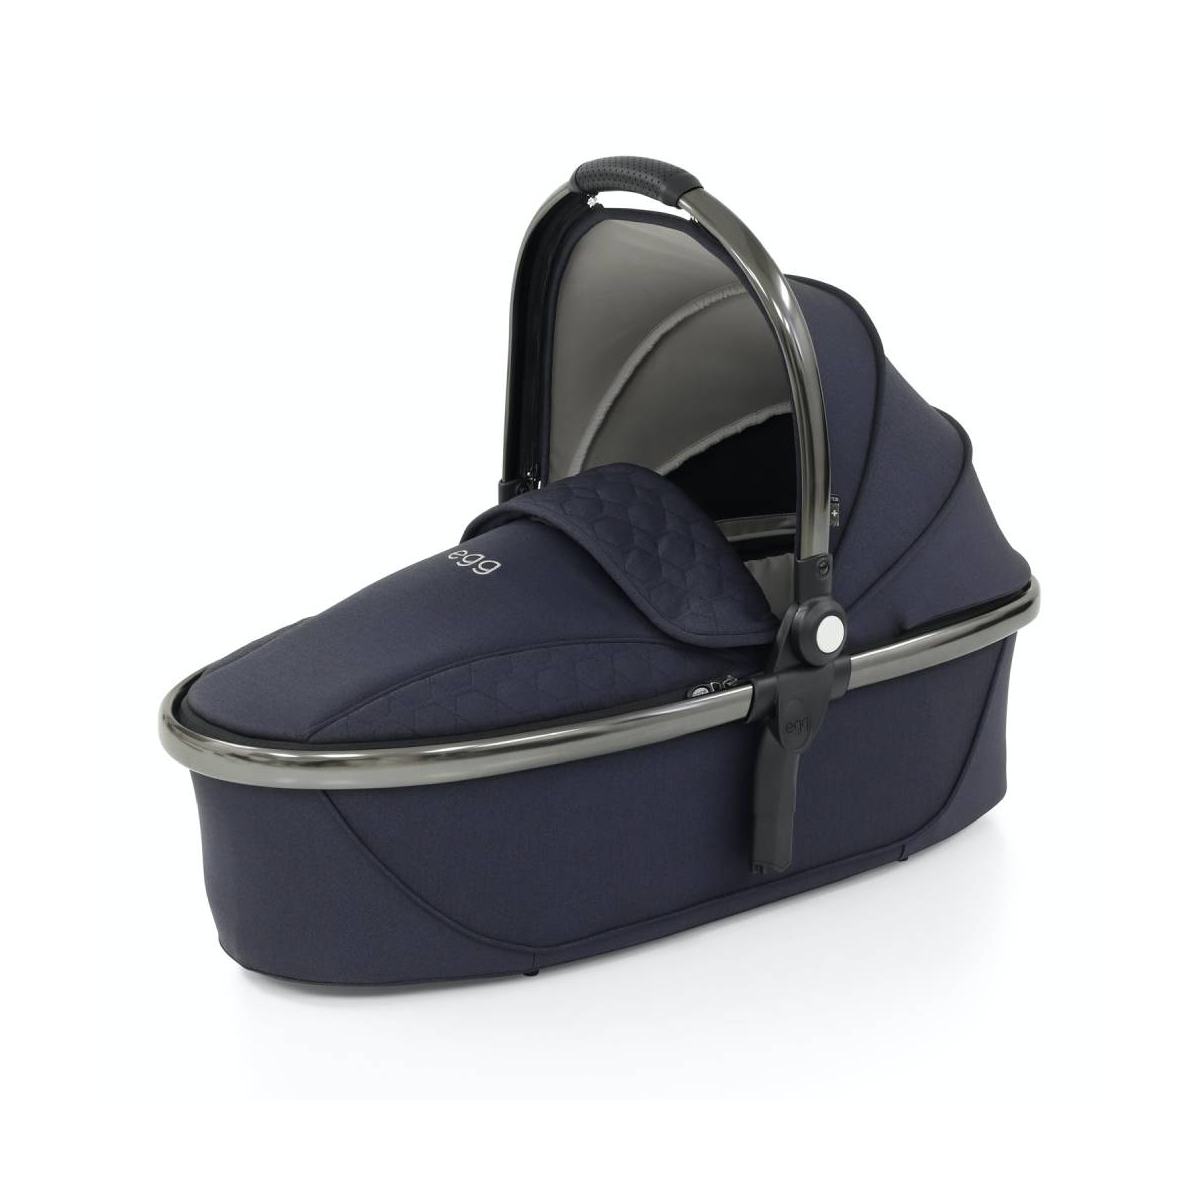 egg® 2 Carrycot